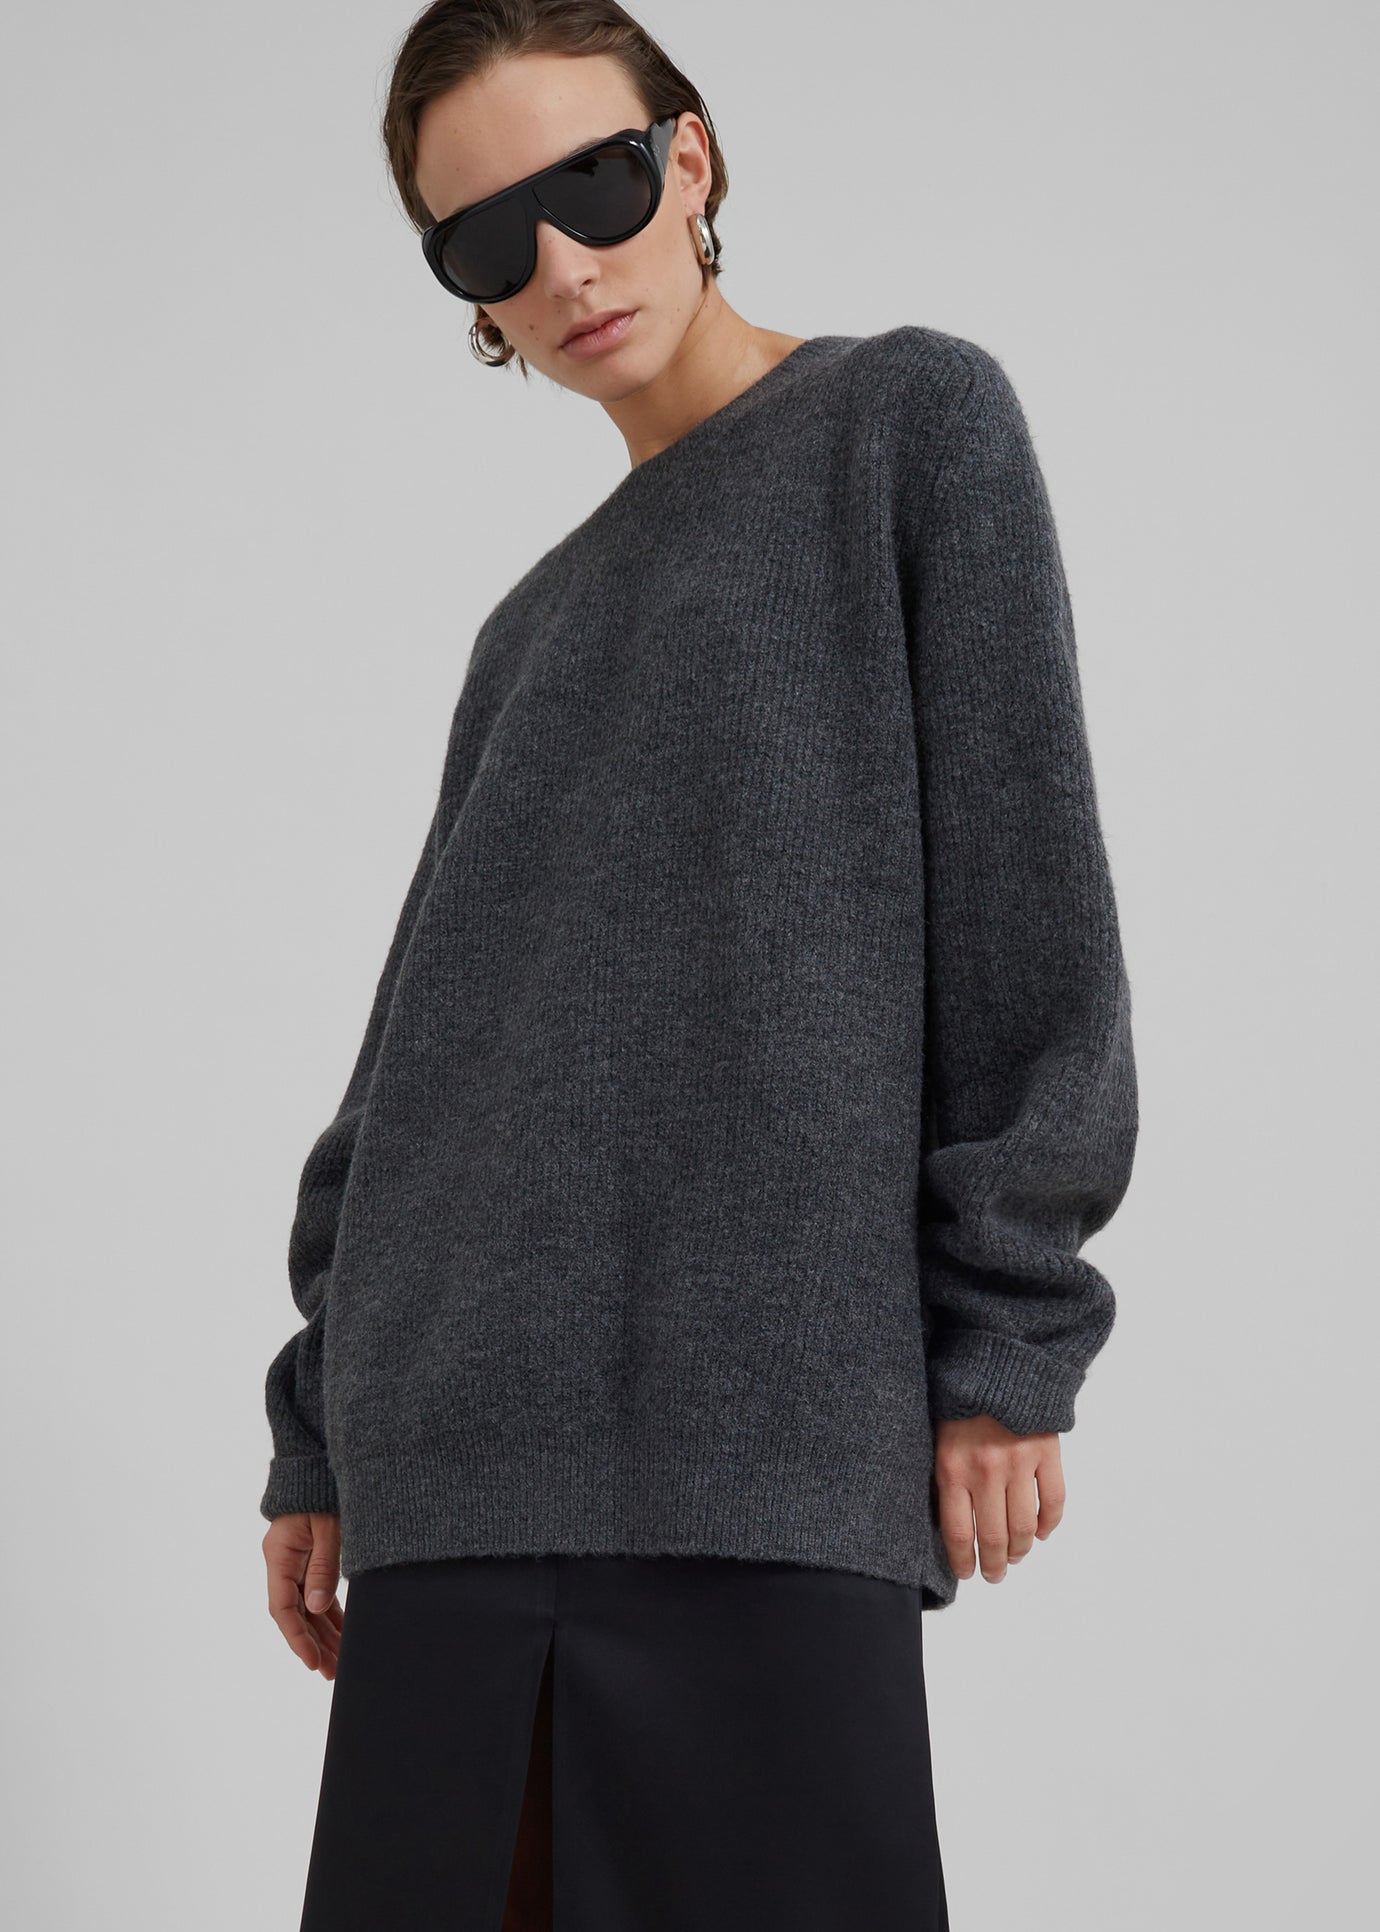 Emory Sweater - Charcoal